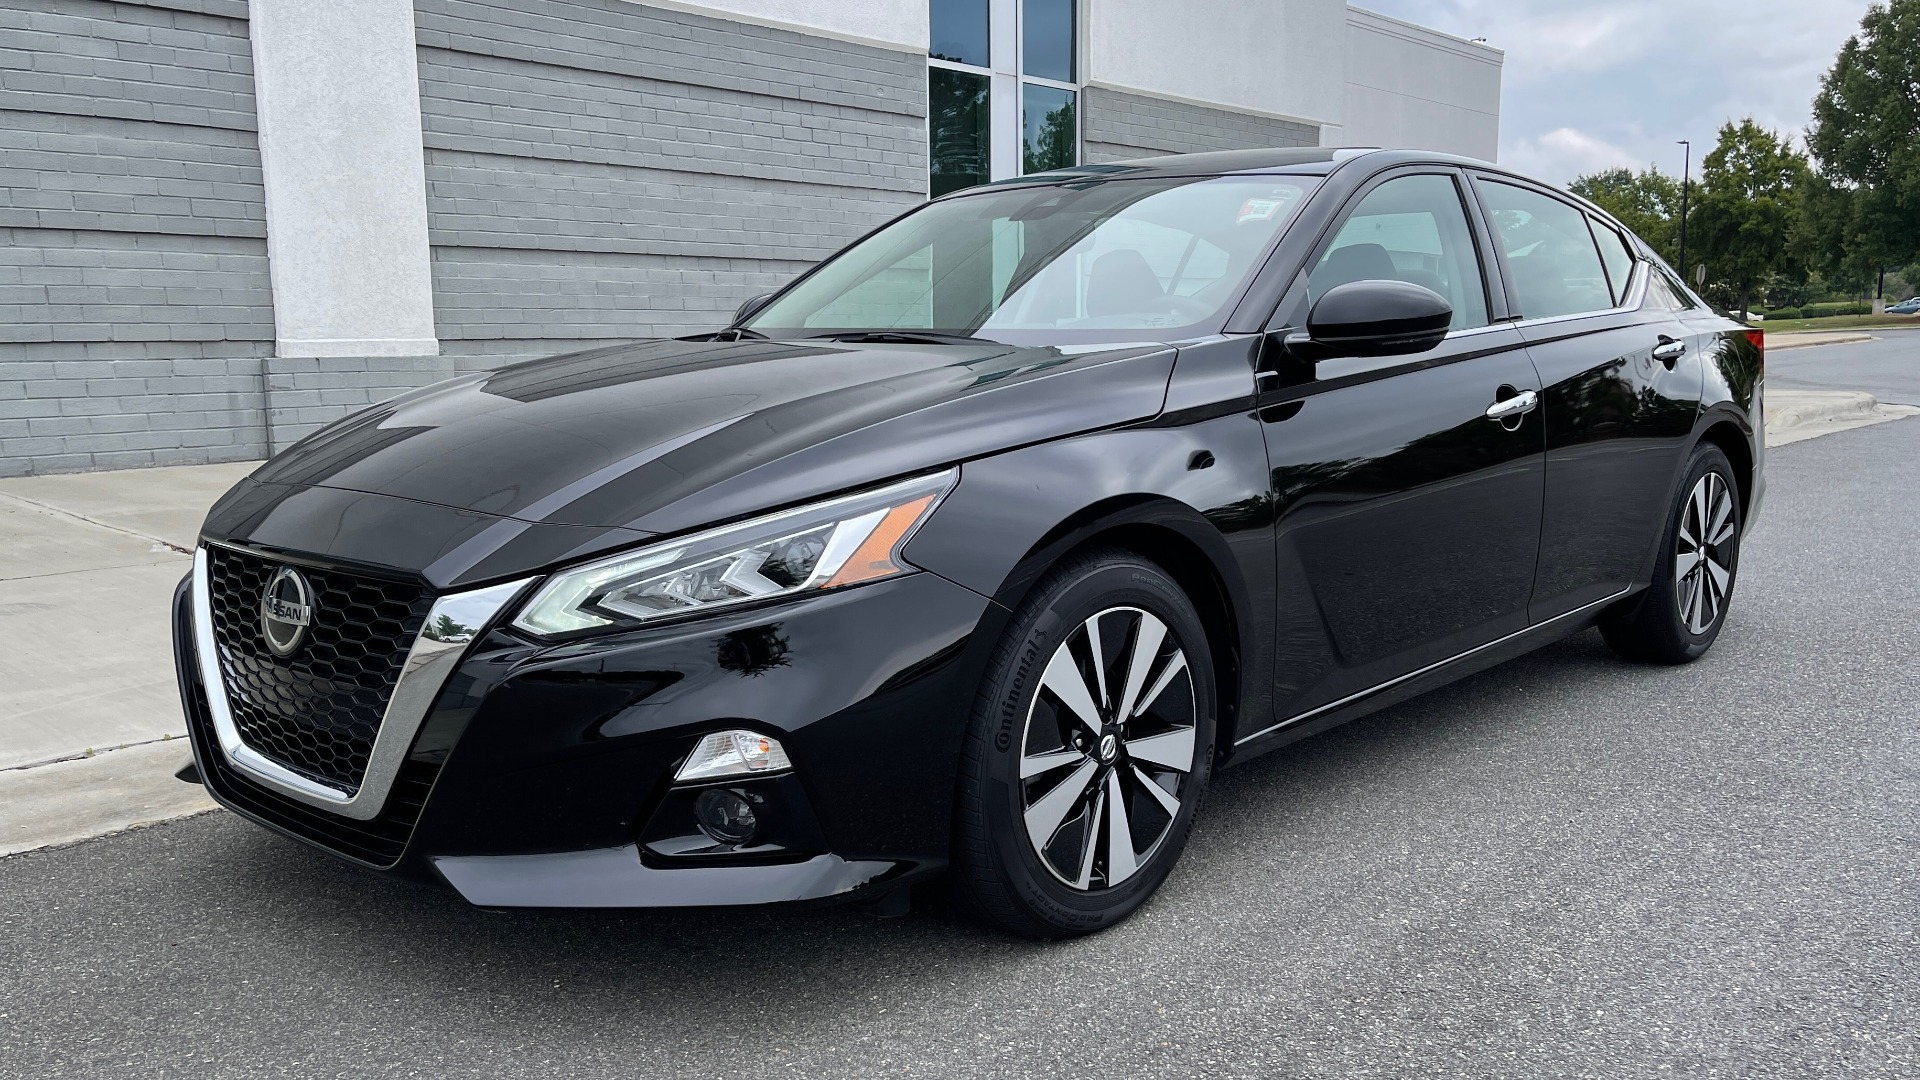 Used 2019 Nissan ALTIMA 2.5 SV SEDAN / CVT TRANS / SUNROOF / REARVIEW / LOW MILES for sale Sold at Formula Imports in Charlotte NC 28227 3